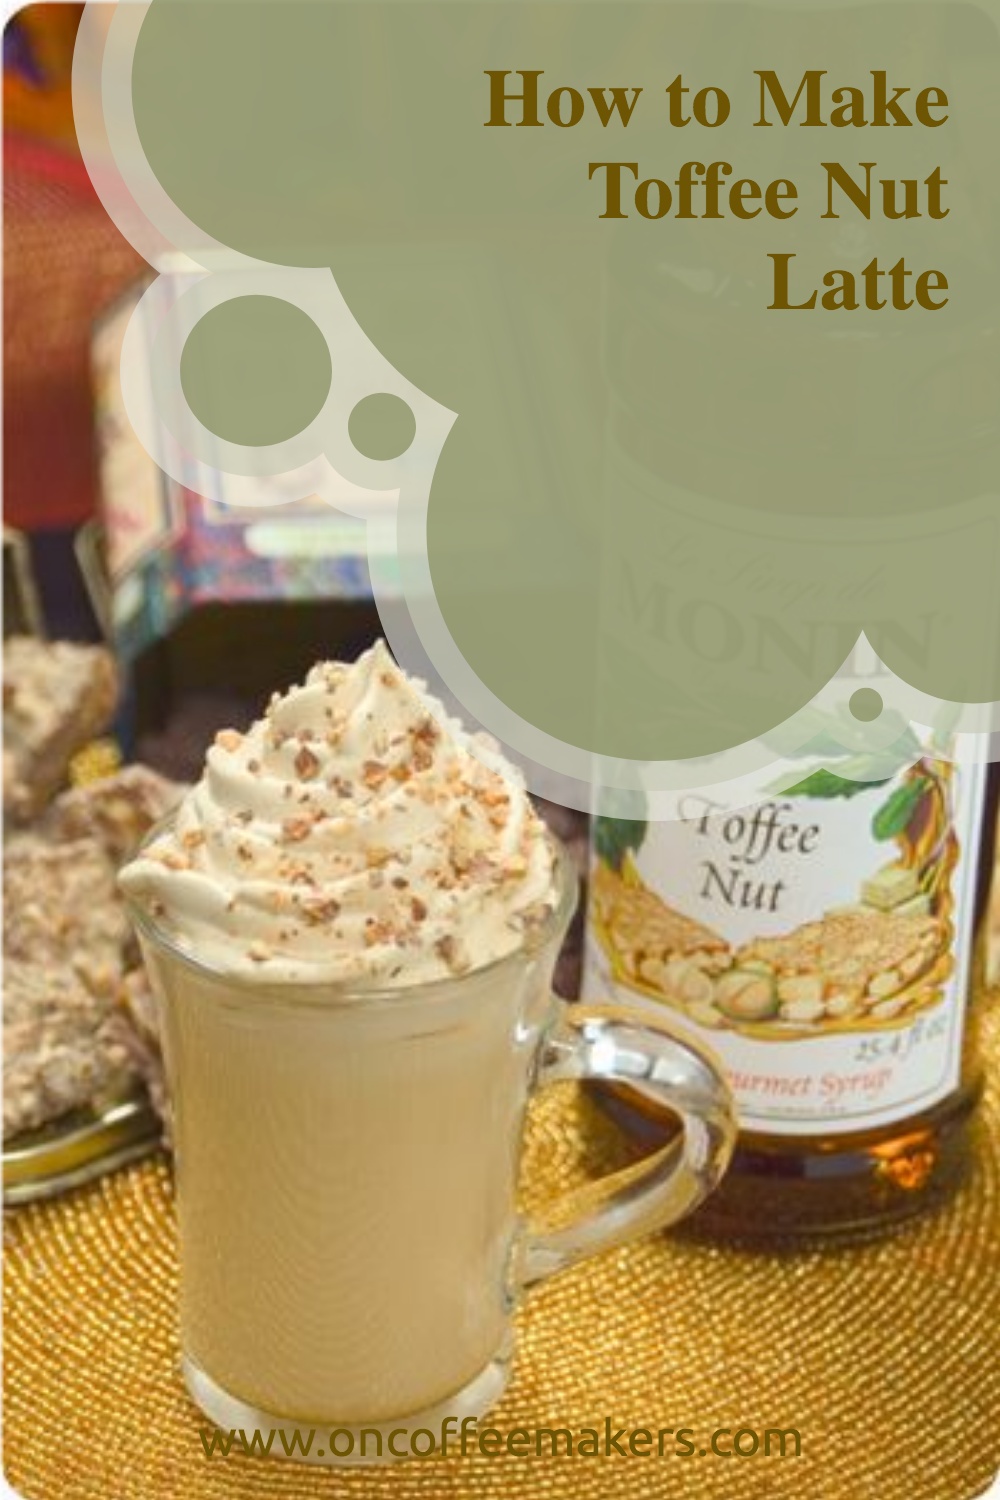 How To Make Toffee Nut Latte